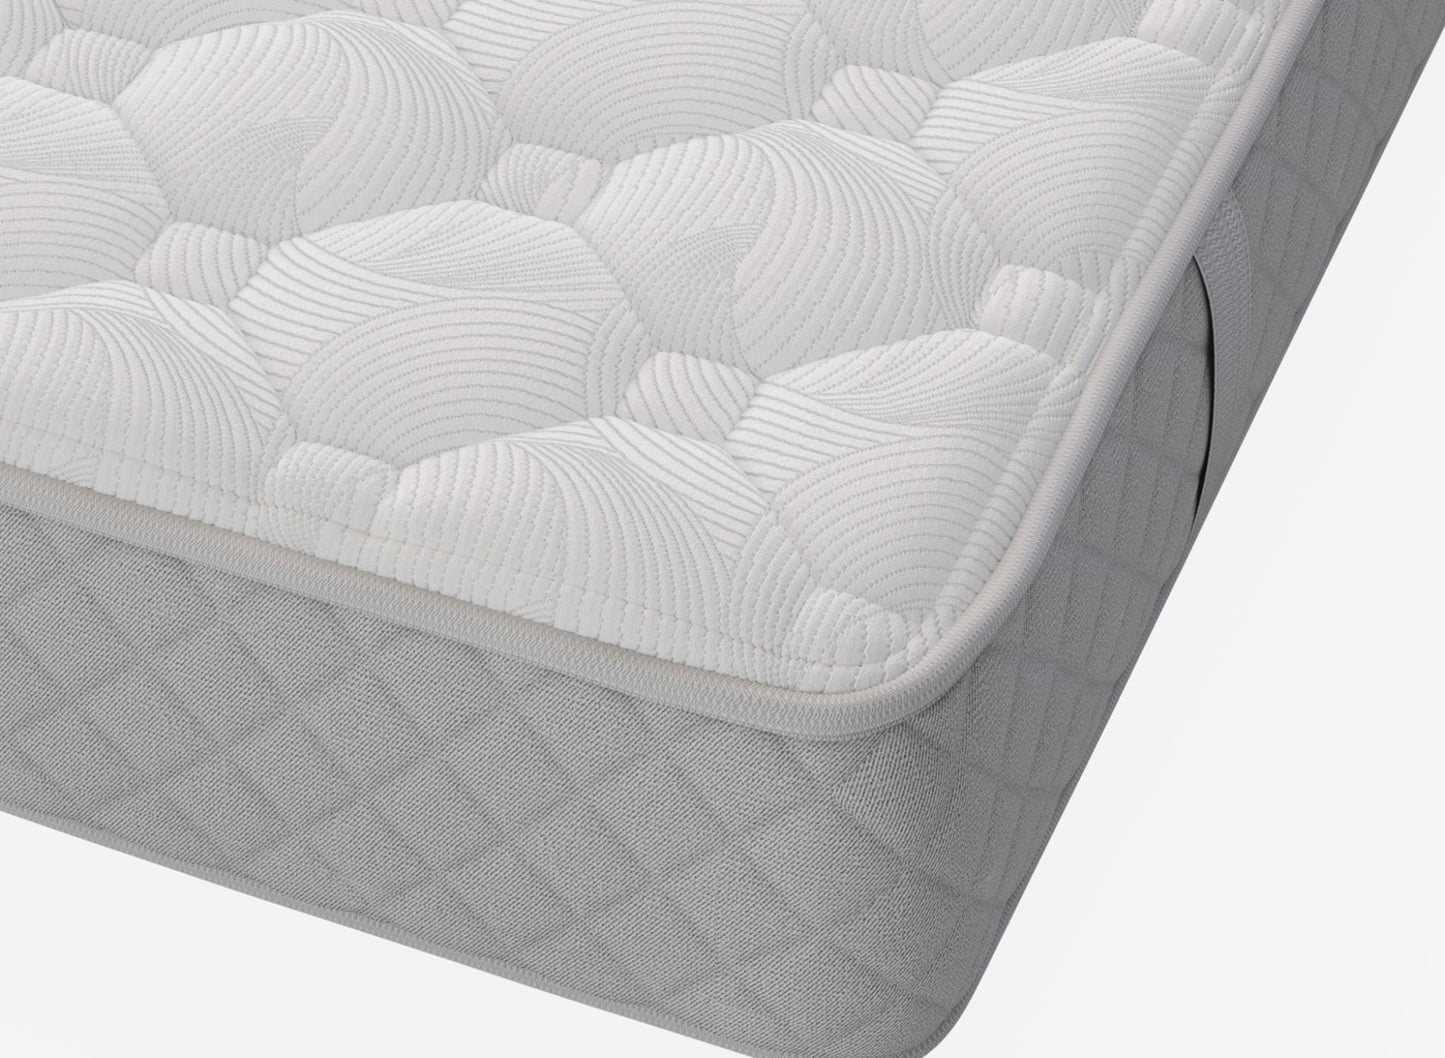 Sealy Astwick Wool Mattresses - Advantage Collection by Sealy in 5059712003729 only at TV Beds Northwest